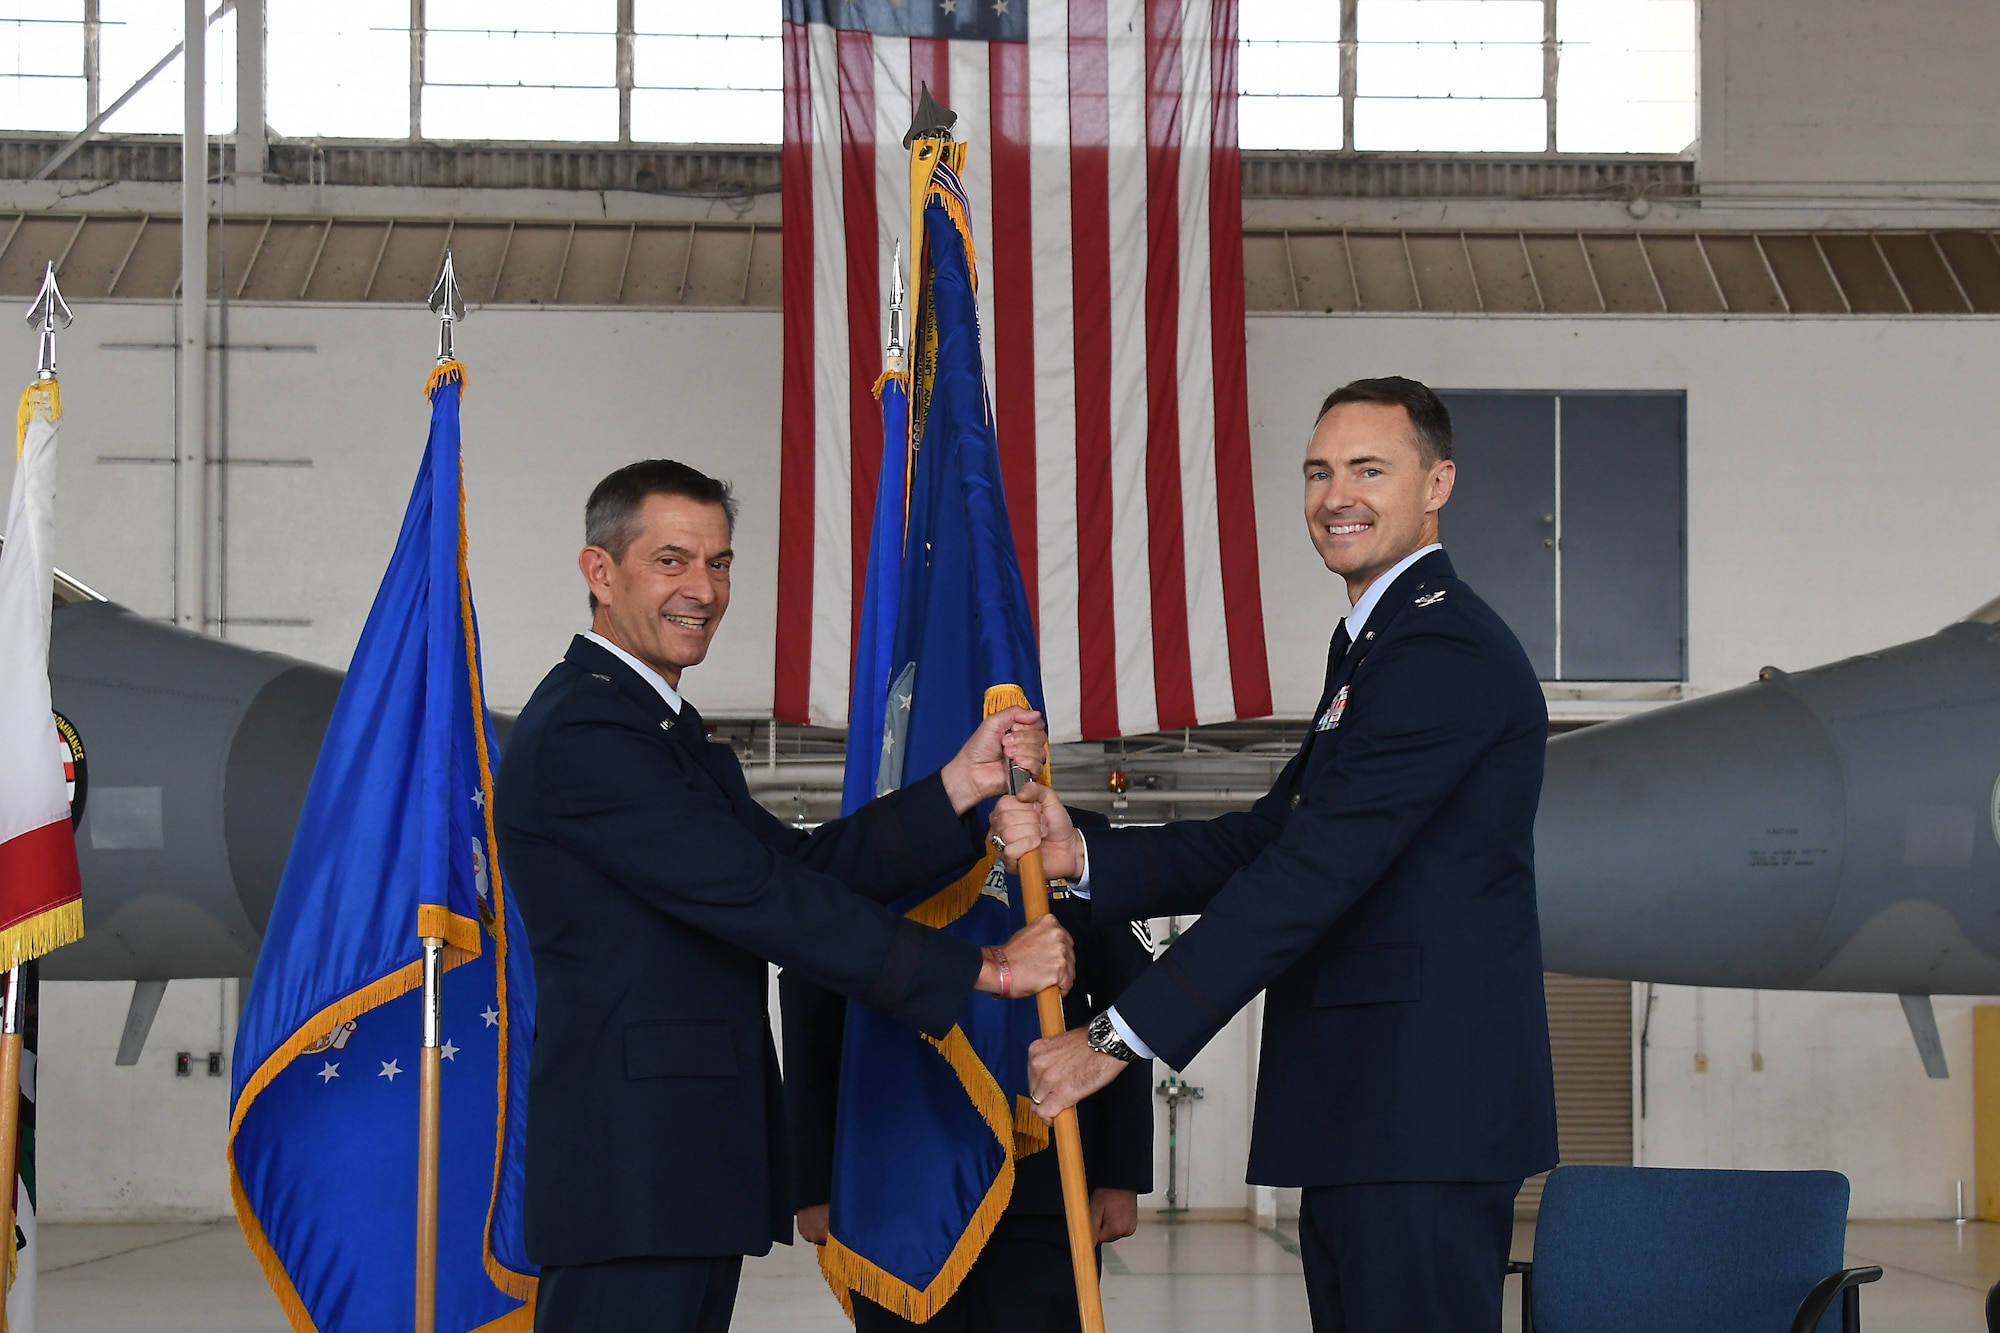 Two men stand wearing the Air Force service dress uniform (blue suit) facing the photo frame holding an blue Air Force guidon (flag) between them